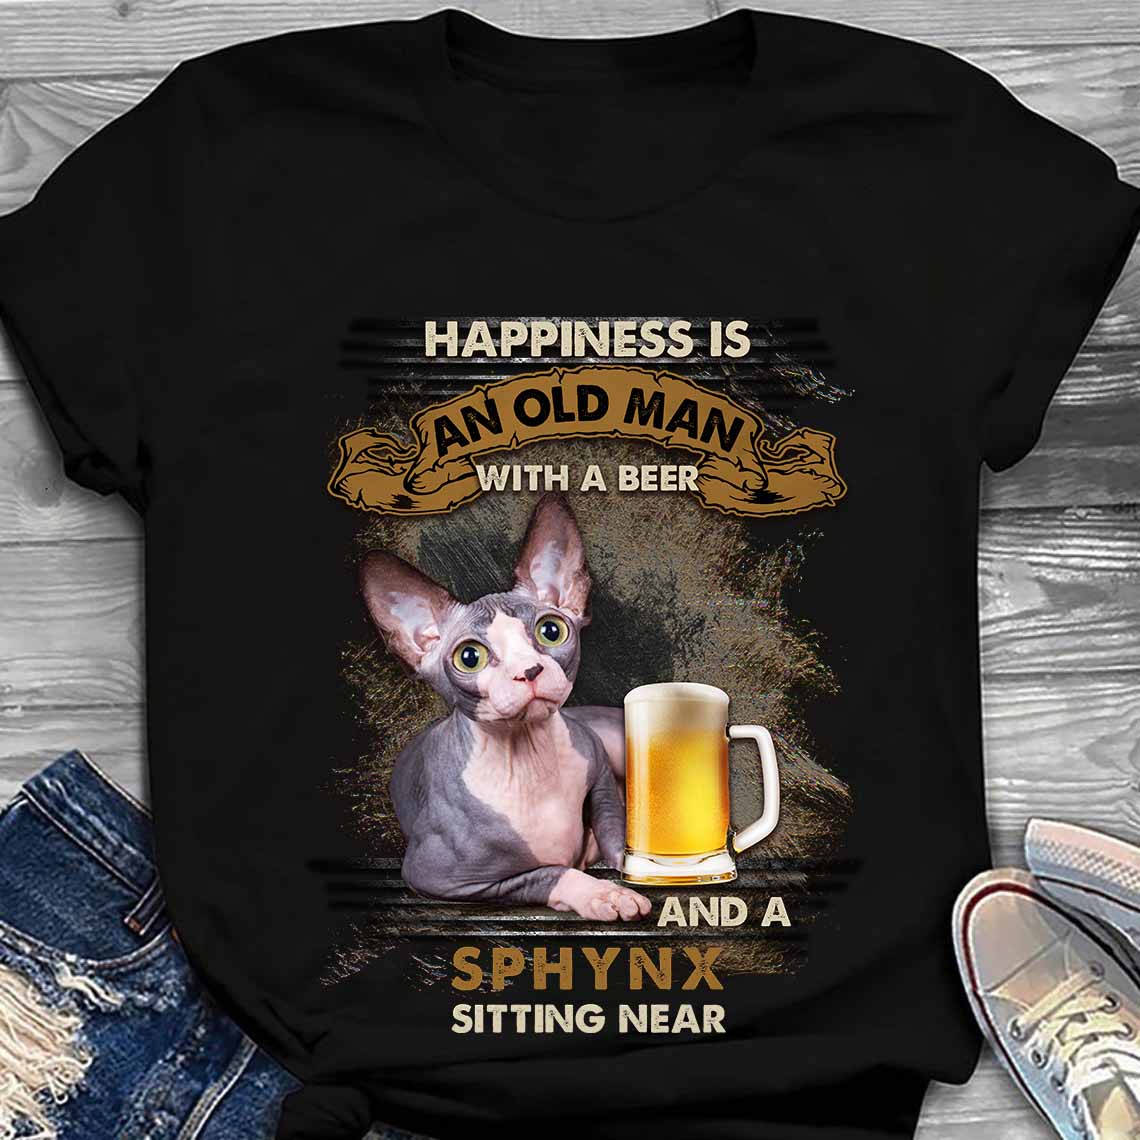 Happiness is an old man with a beer and a Sphynx sitting near - Beer lover